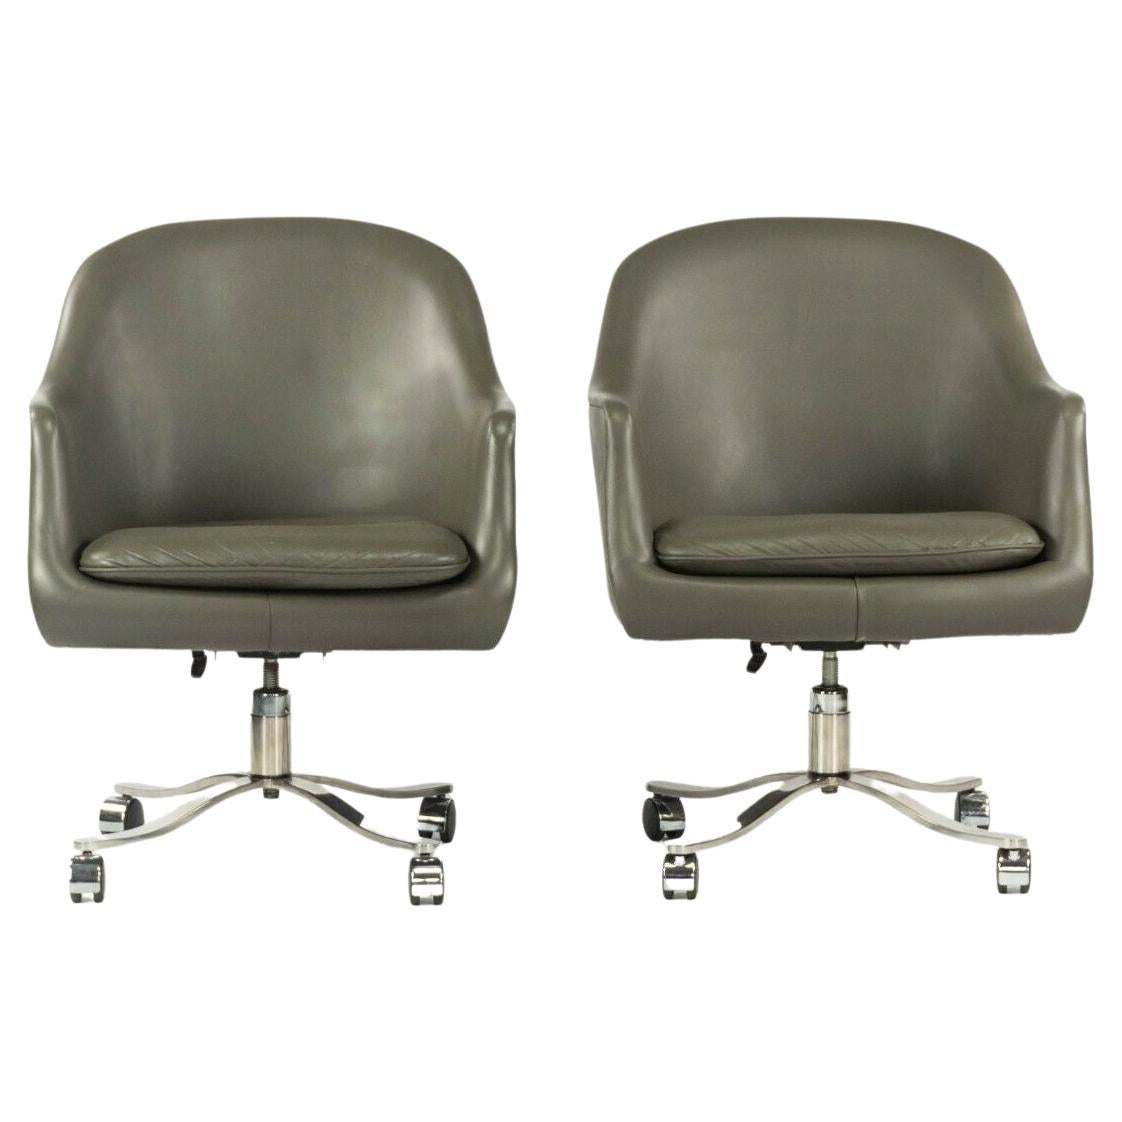 1980s Nicos Zographos Grey Leather Bucket Desk Chairs w/ Alpha Bases